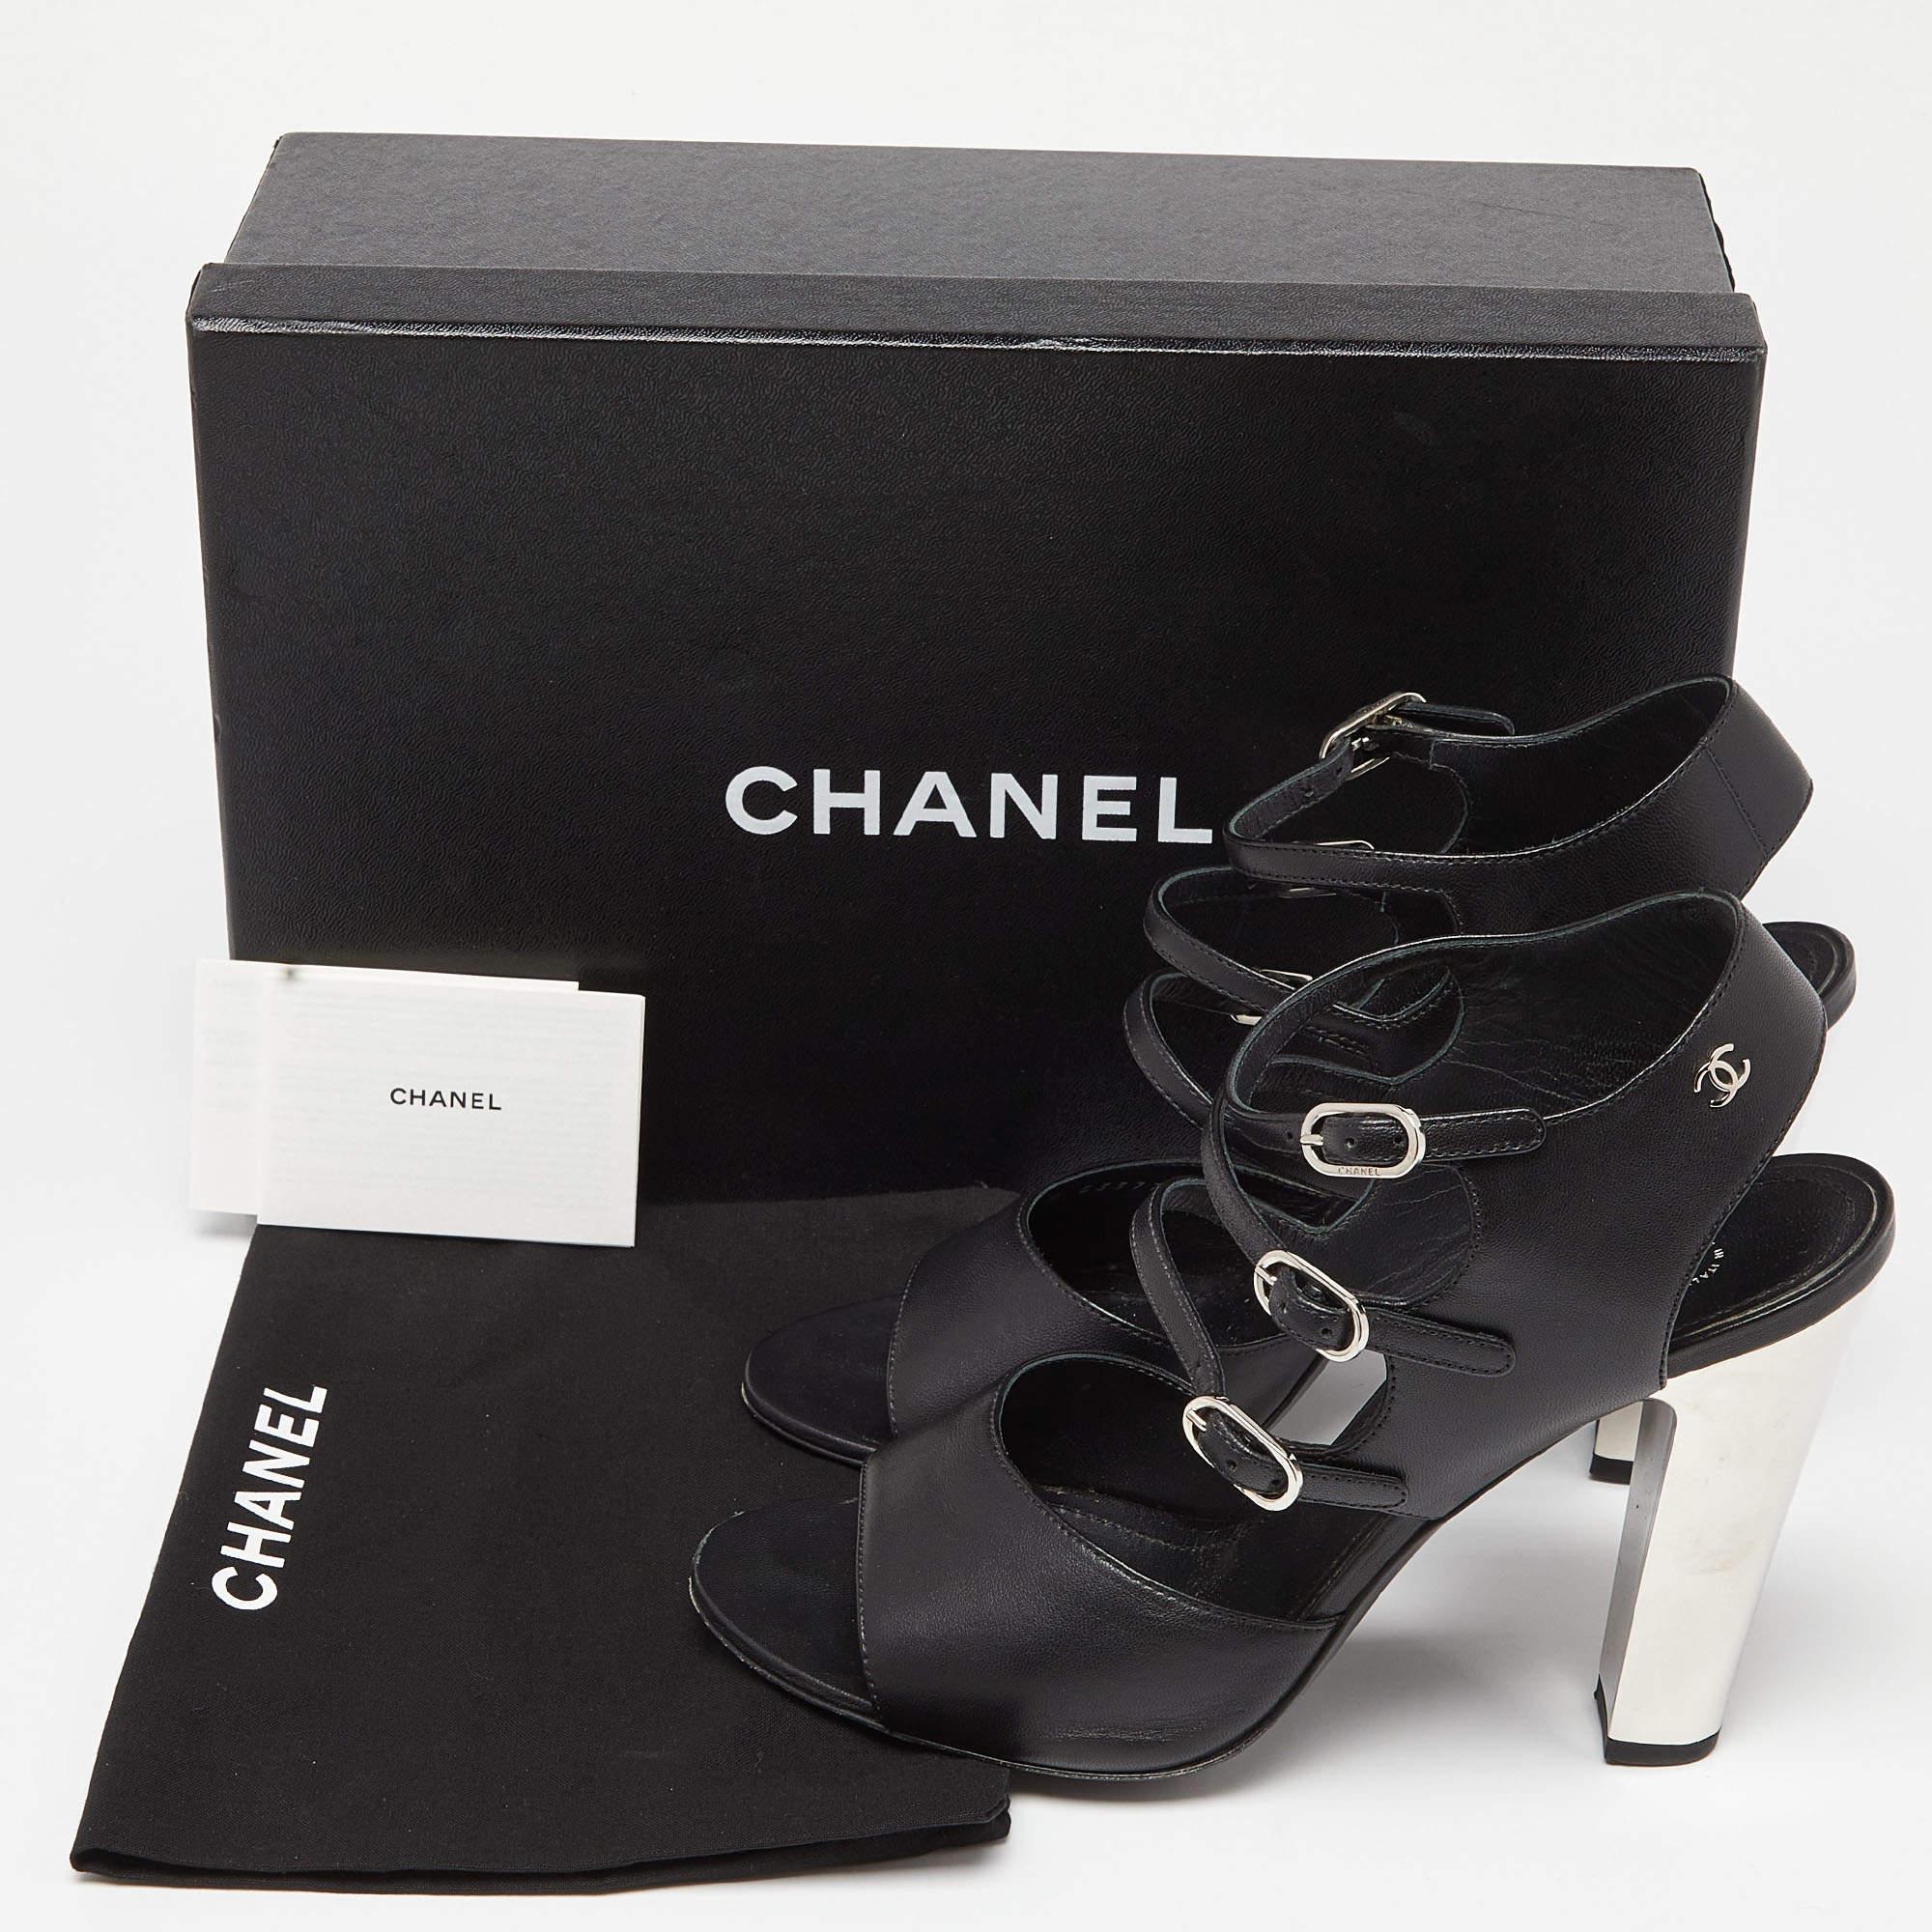 Chanel Black Leather Strappy Buckle Sandals Size 39 5